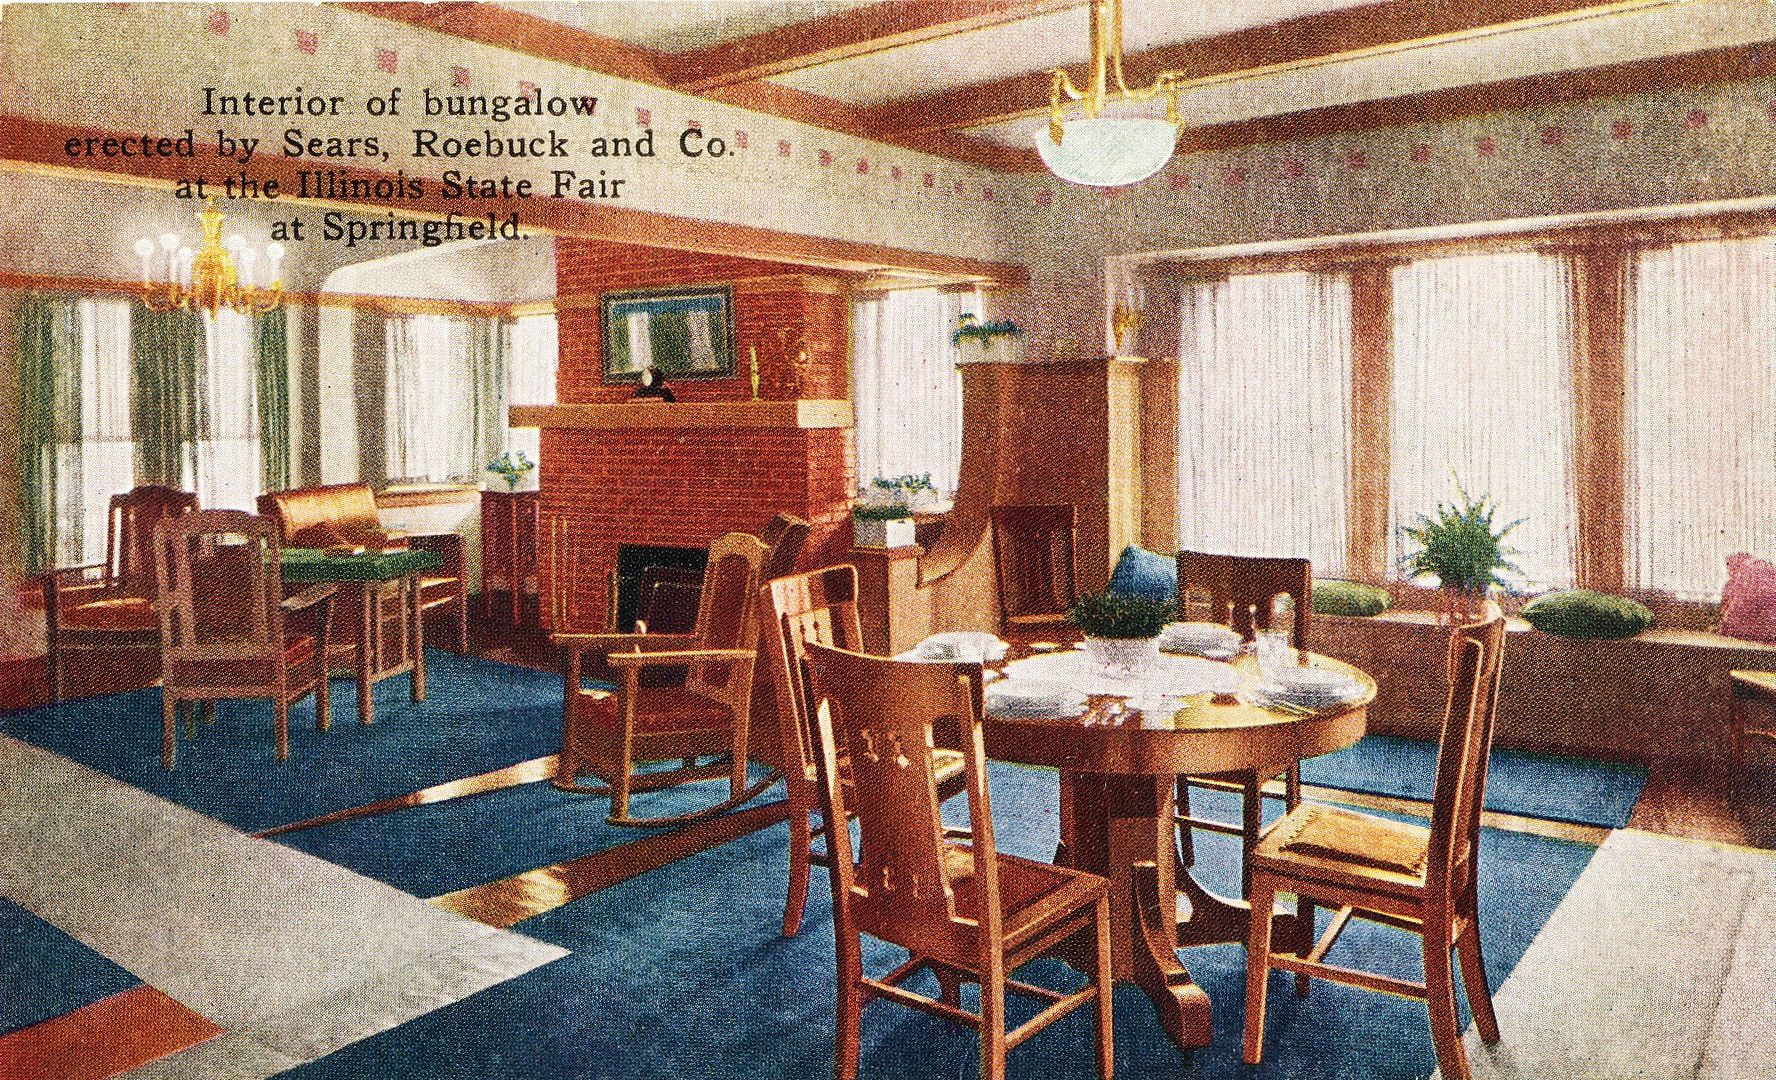 Another post card shows the interior the of the Avondale. Pretty darn fancy. 